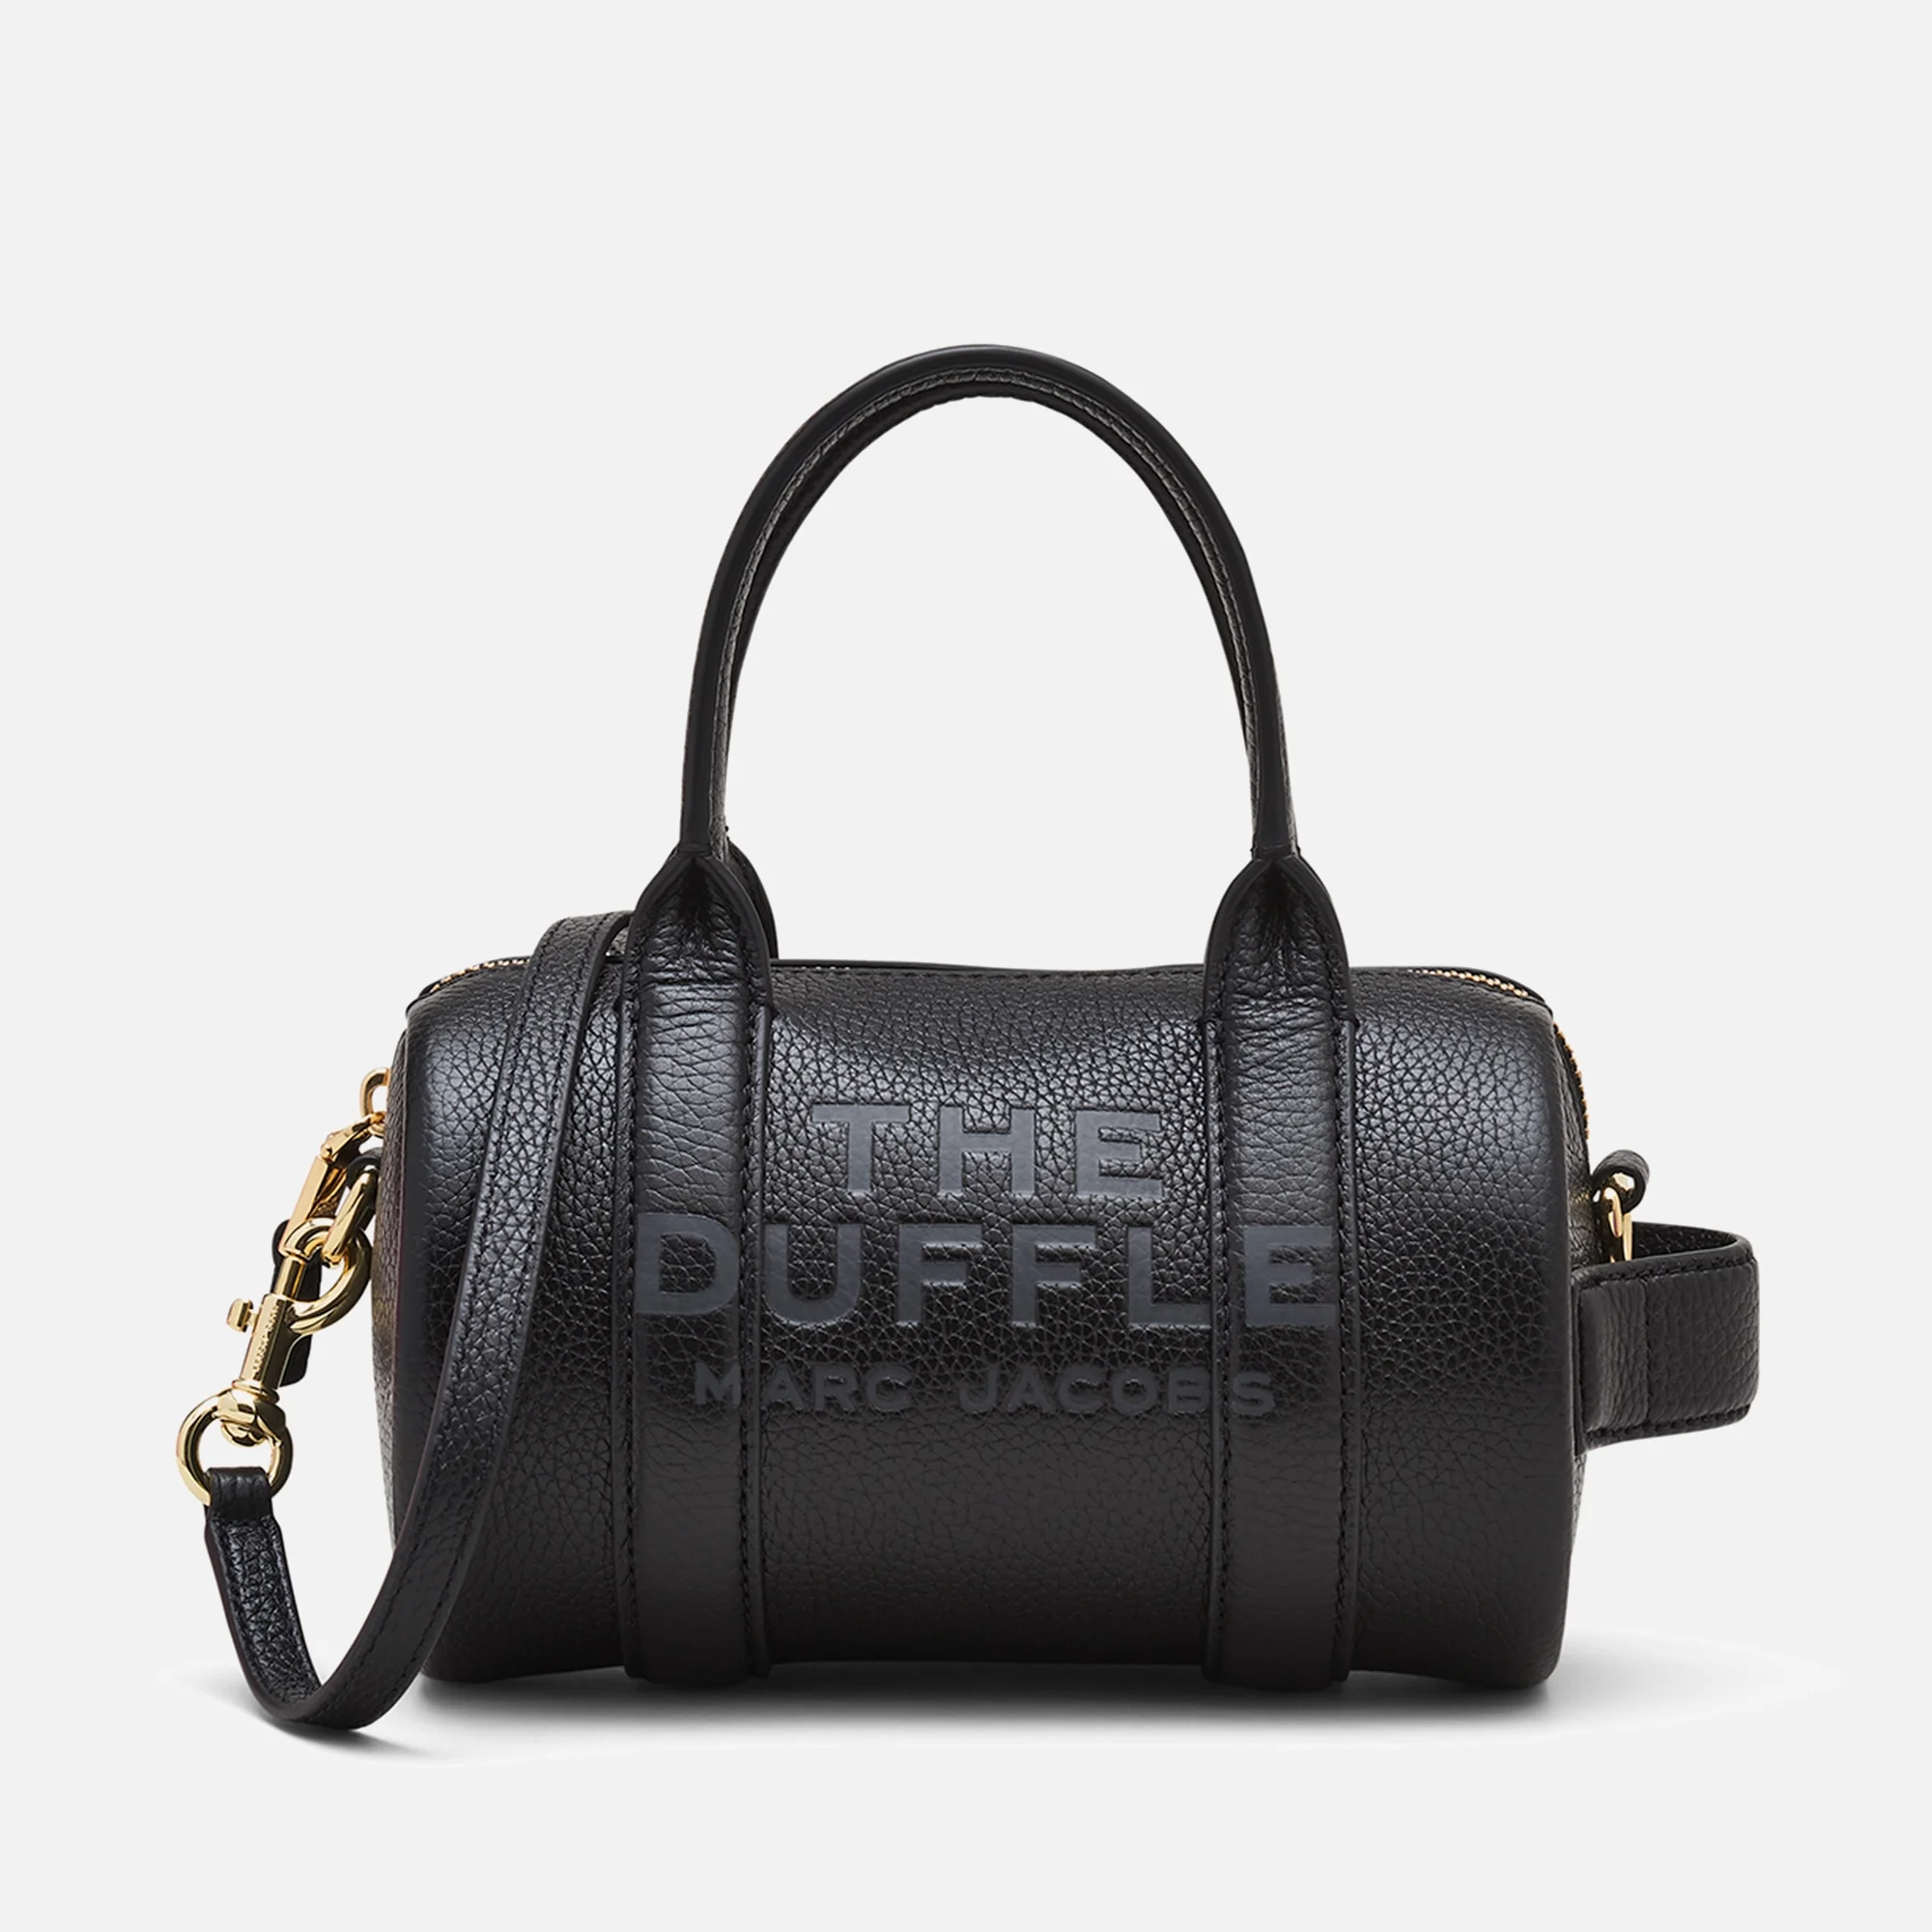 Marc Jacobs The Mini Full-Grained Leather Duffle Bag Image 1